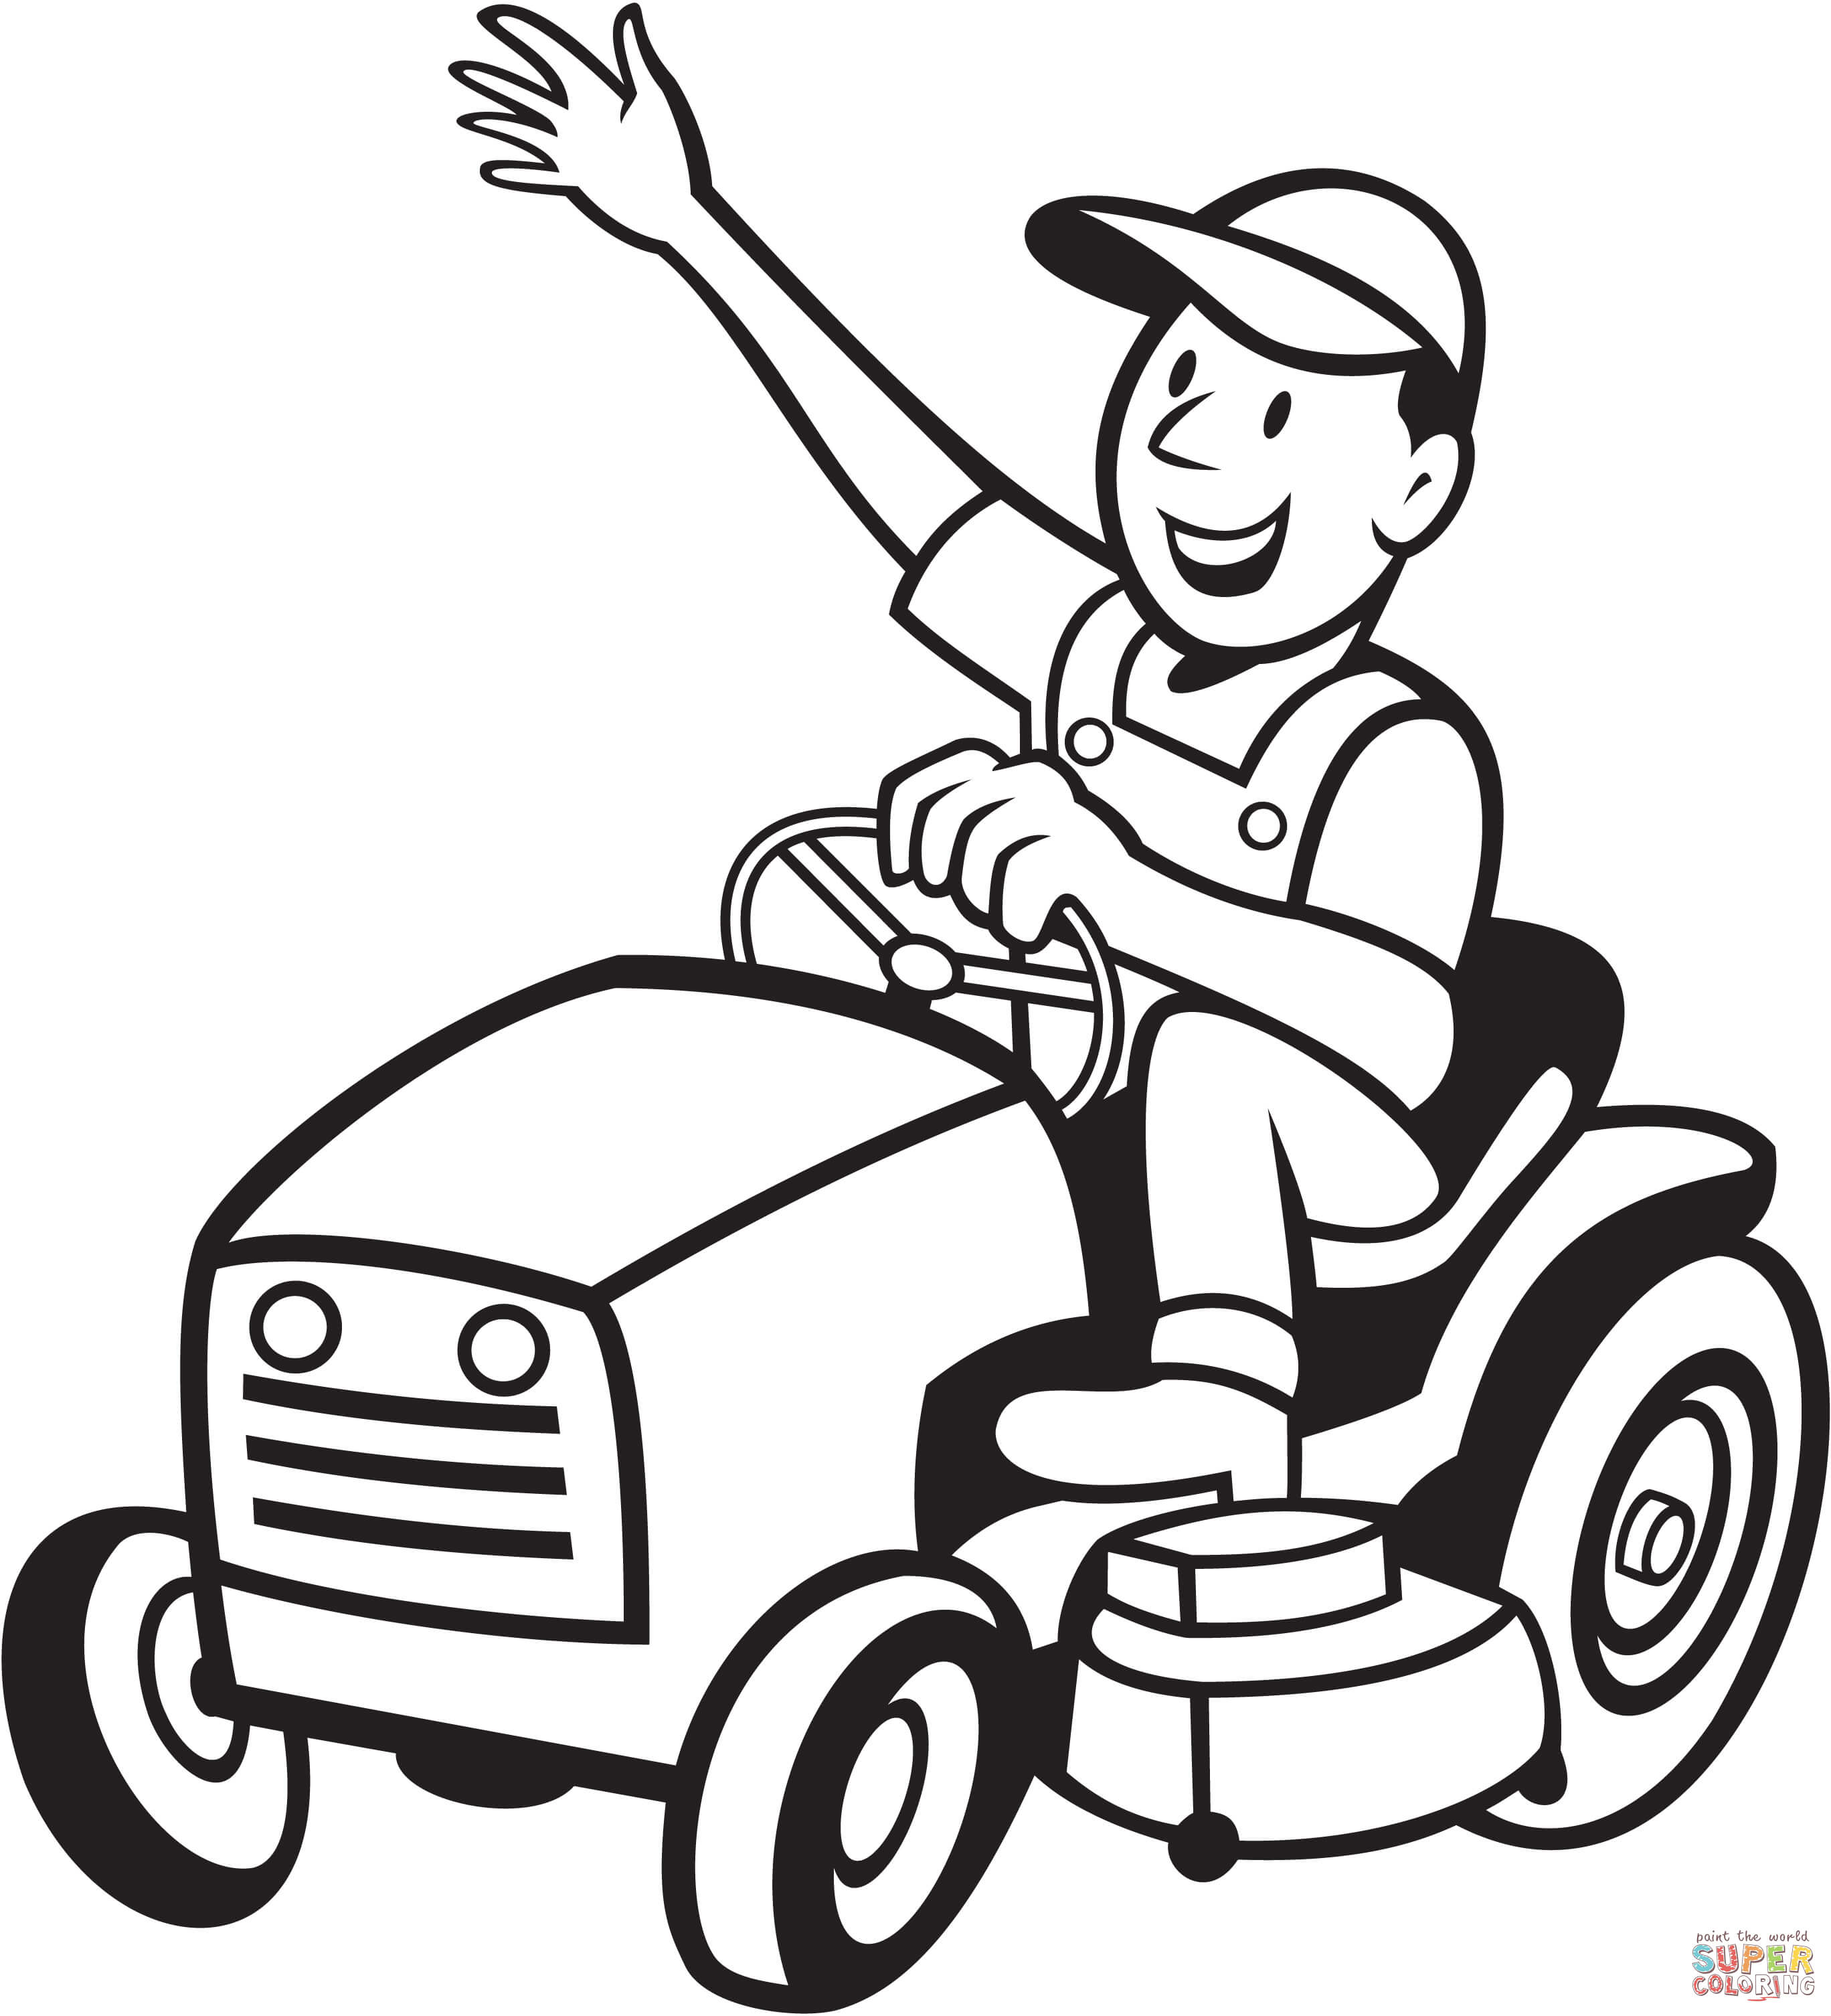 Farmer Riding a Tractor Mower coloring page | Free Printable Coloring Pages